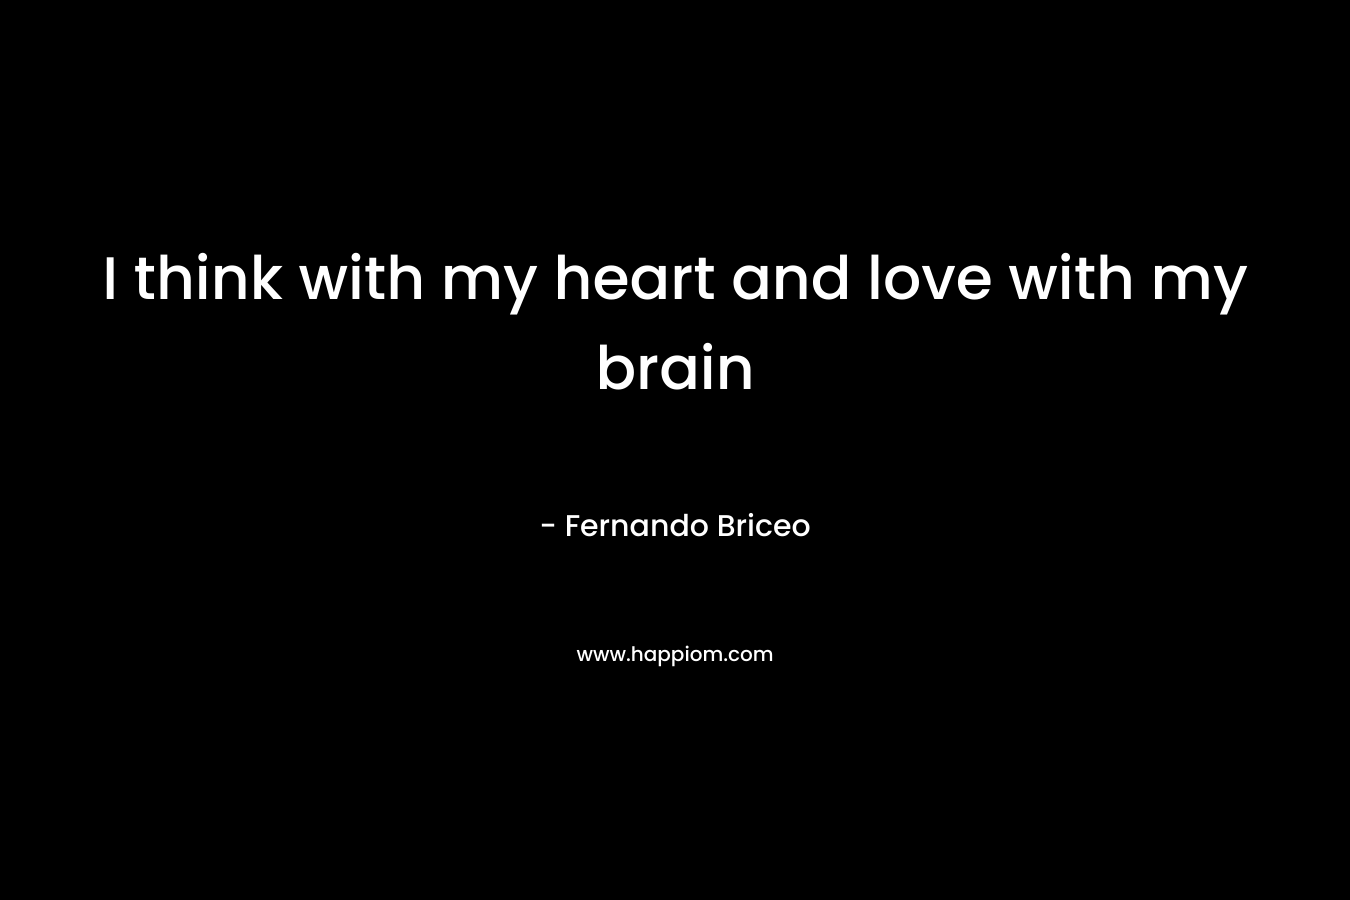 I think with my heart and love with my brain